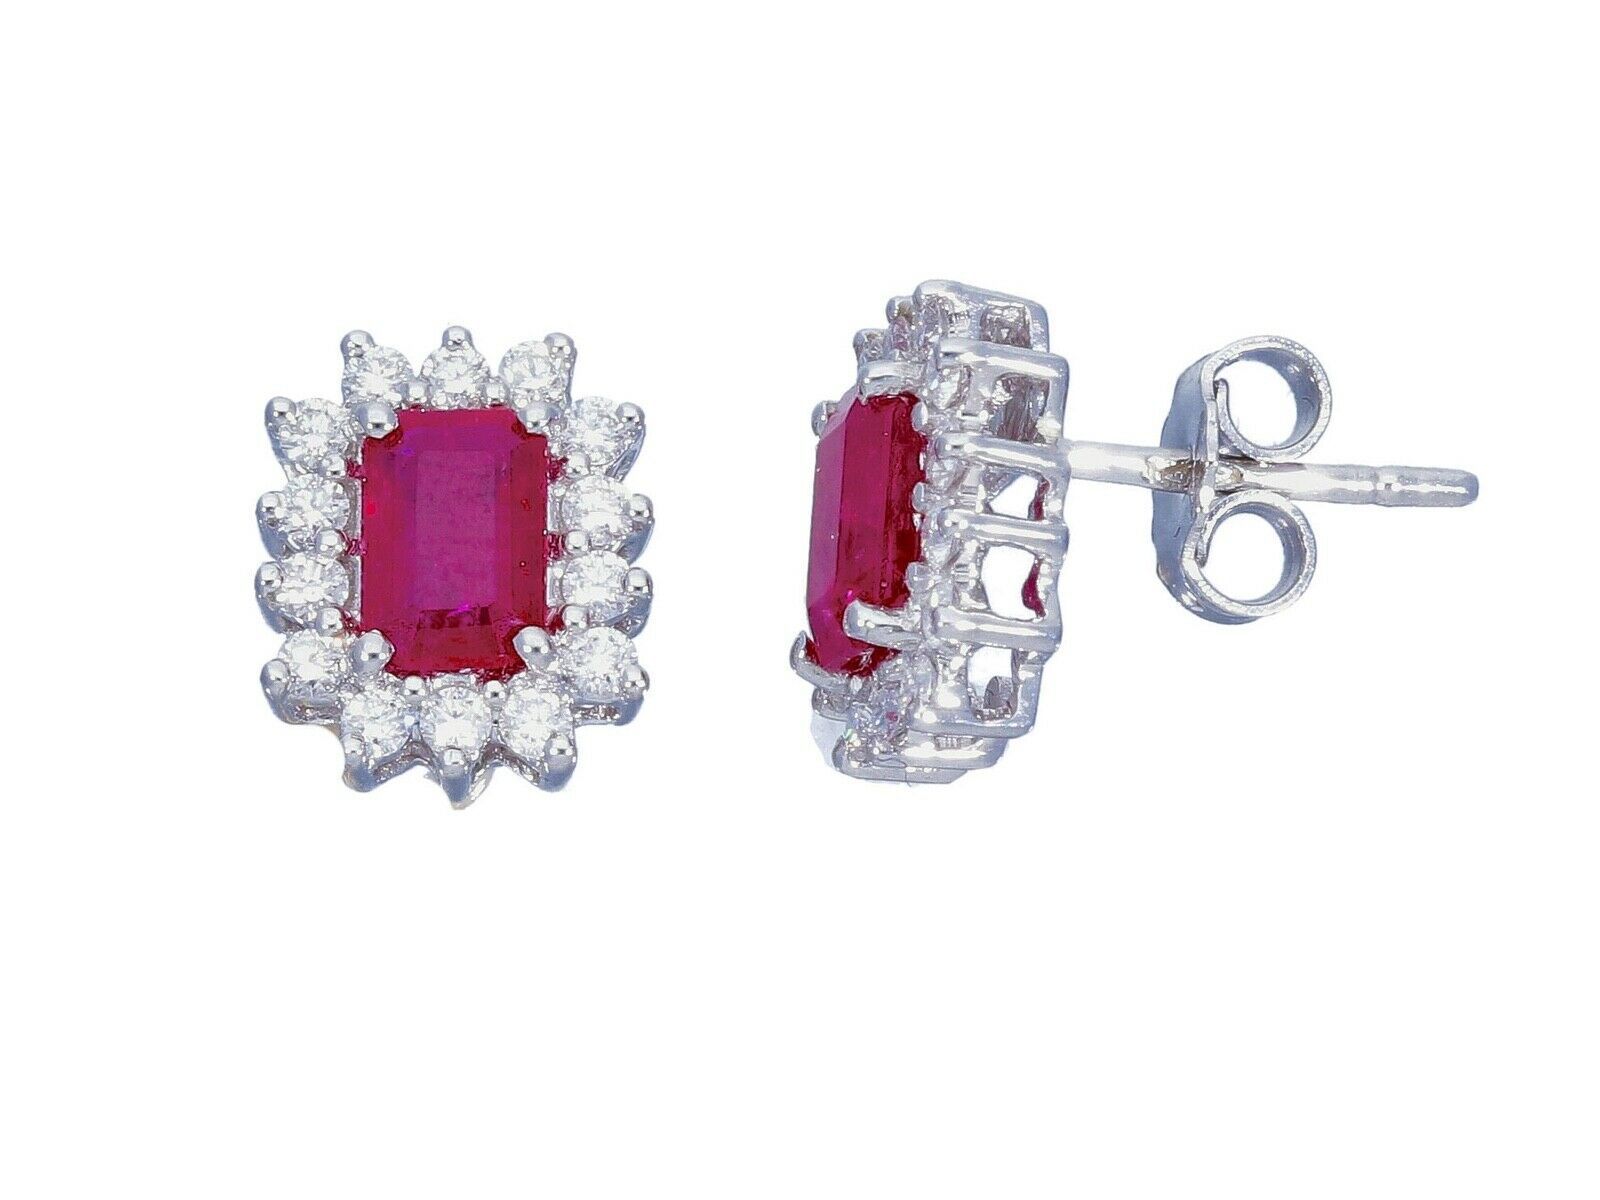 Primary image for 18K WHITE GOLD FLOWER EARRINGS, DIAMONDS 0.44 & EMERALD CUT RED RUBIES 1.40